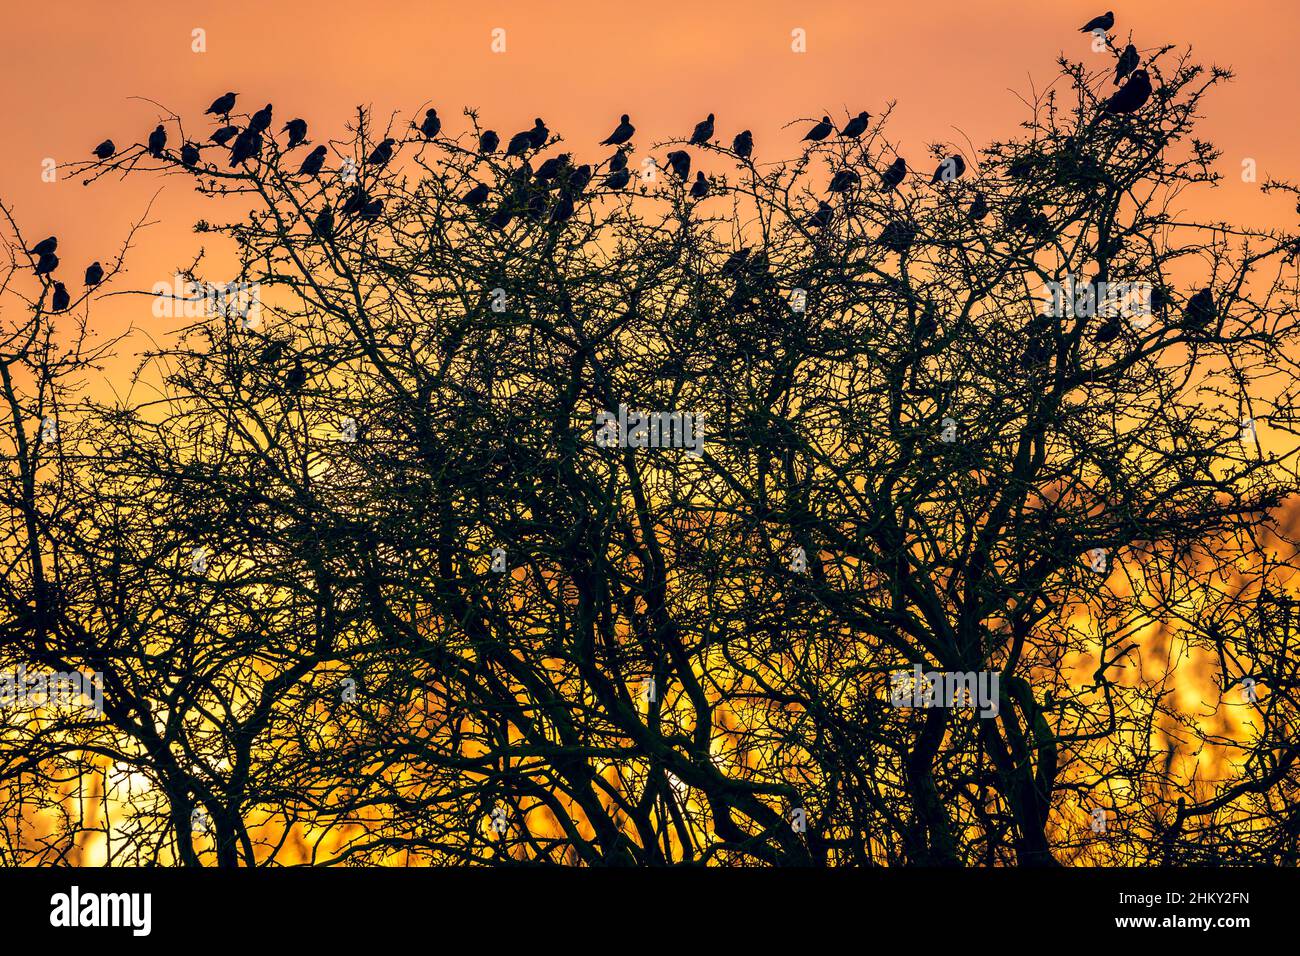 Silhouette of a flock of starlings in winter, roosting in a leafless tree just as a beautiful dawn breaks over the Yorkshire Wolds, UK.  Horizontal. Stock Photo